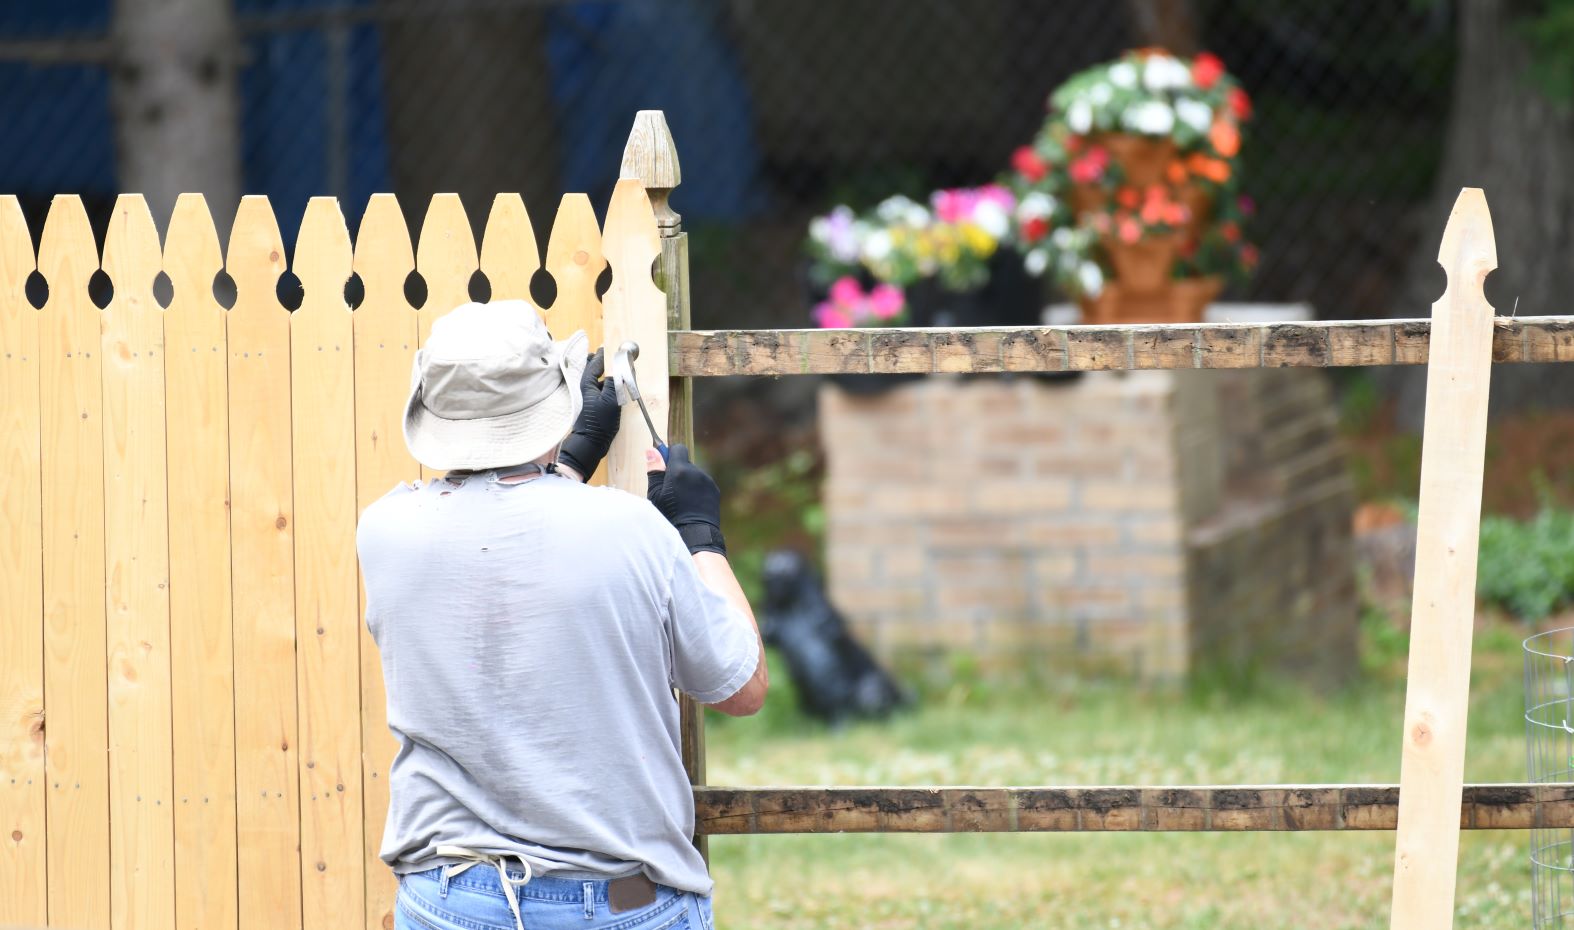 A man hammers a wooden fence post into place.